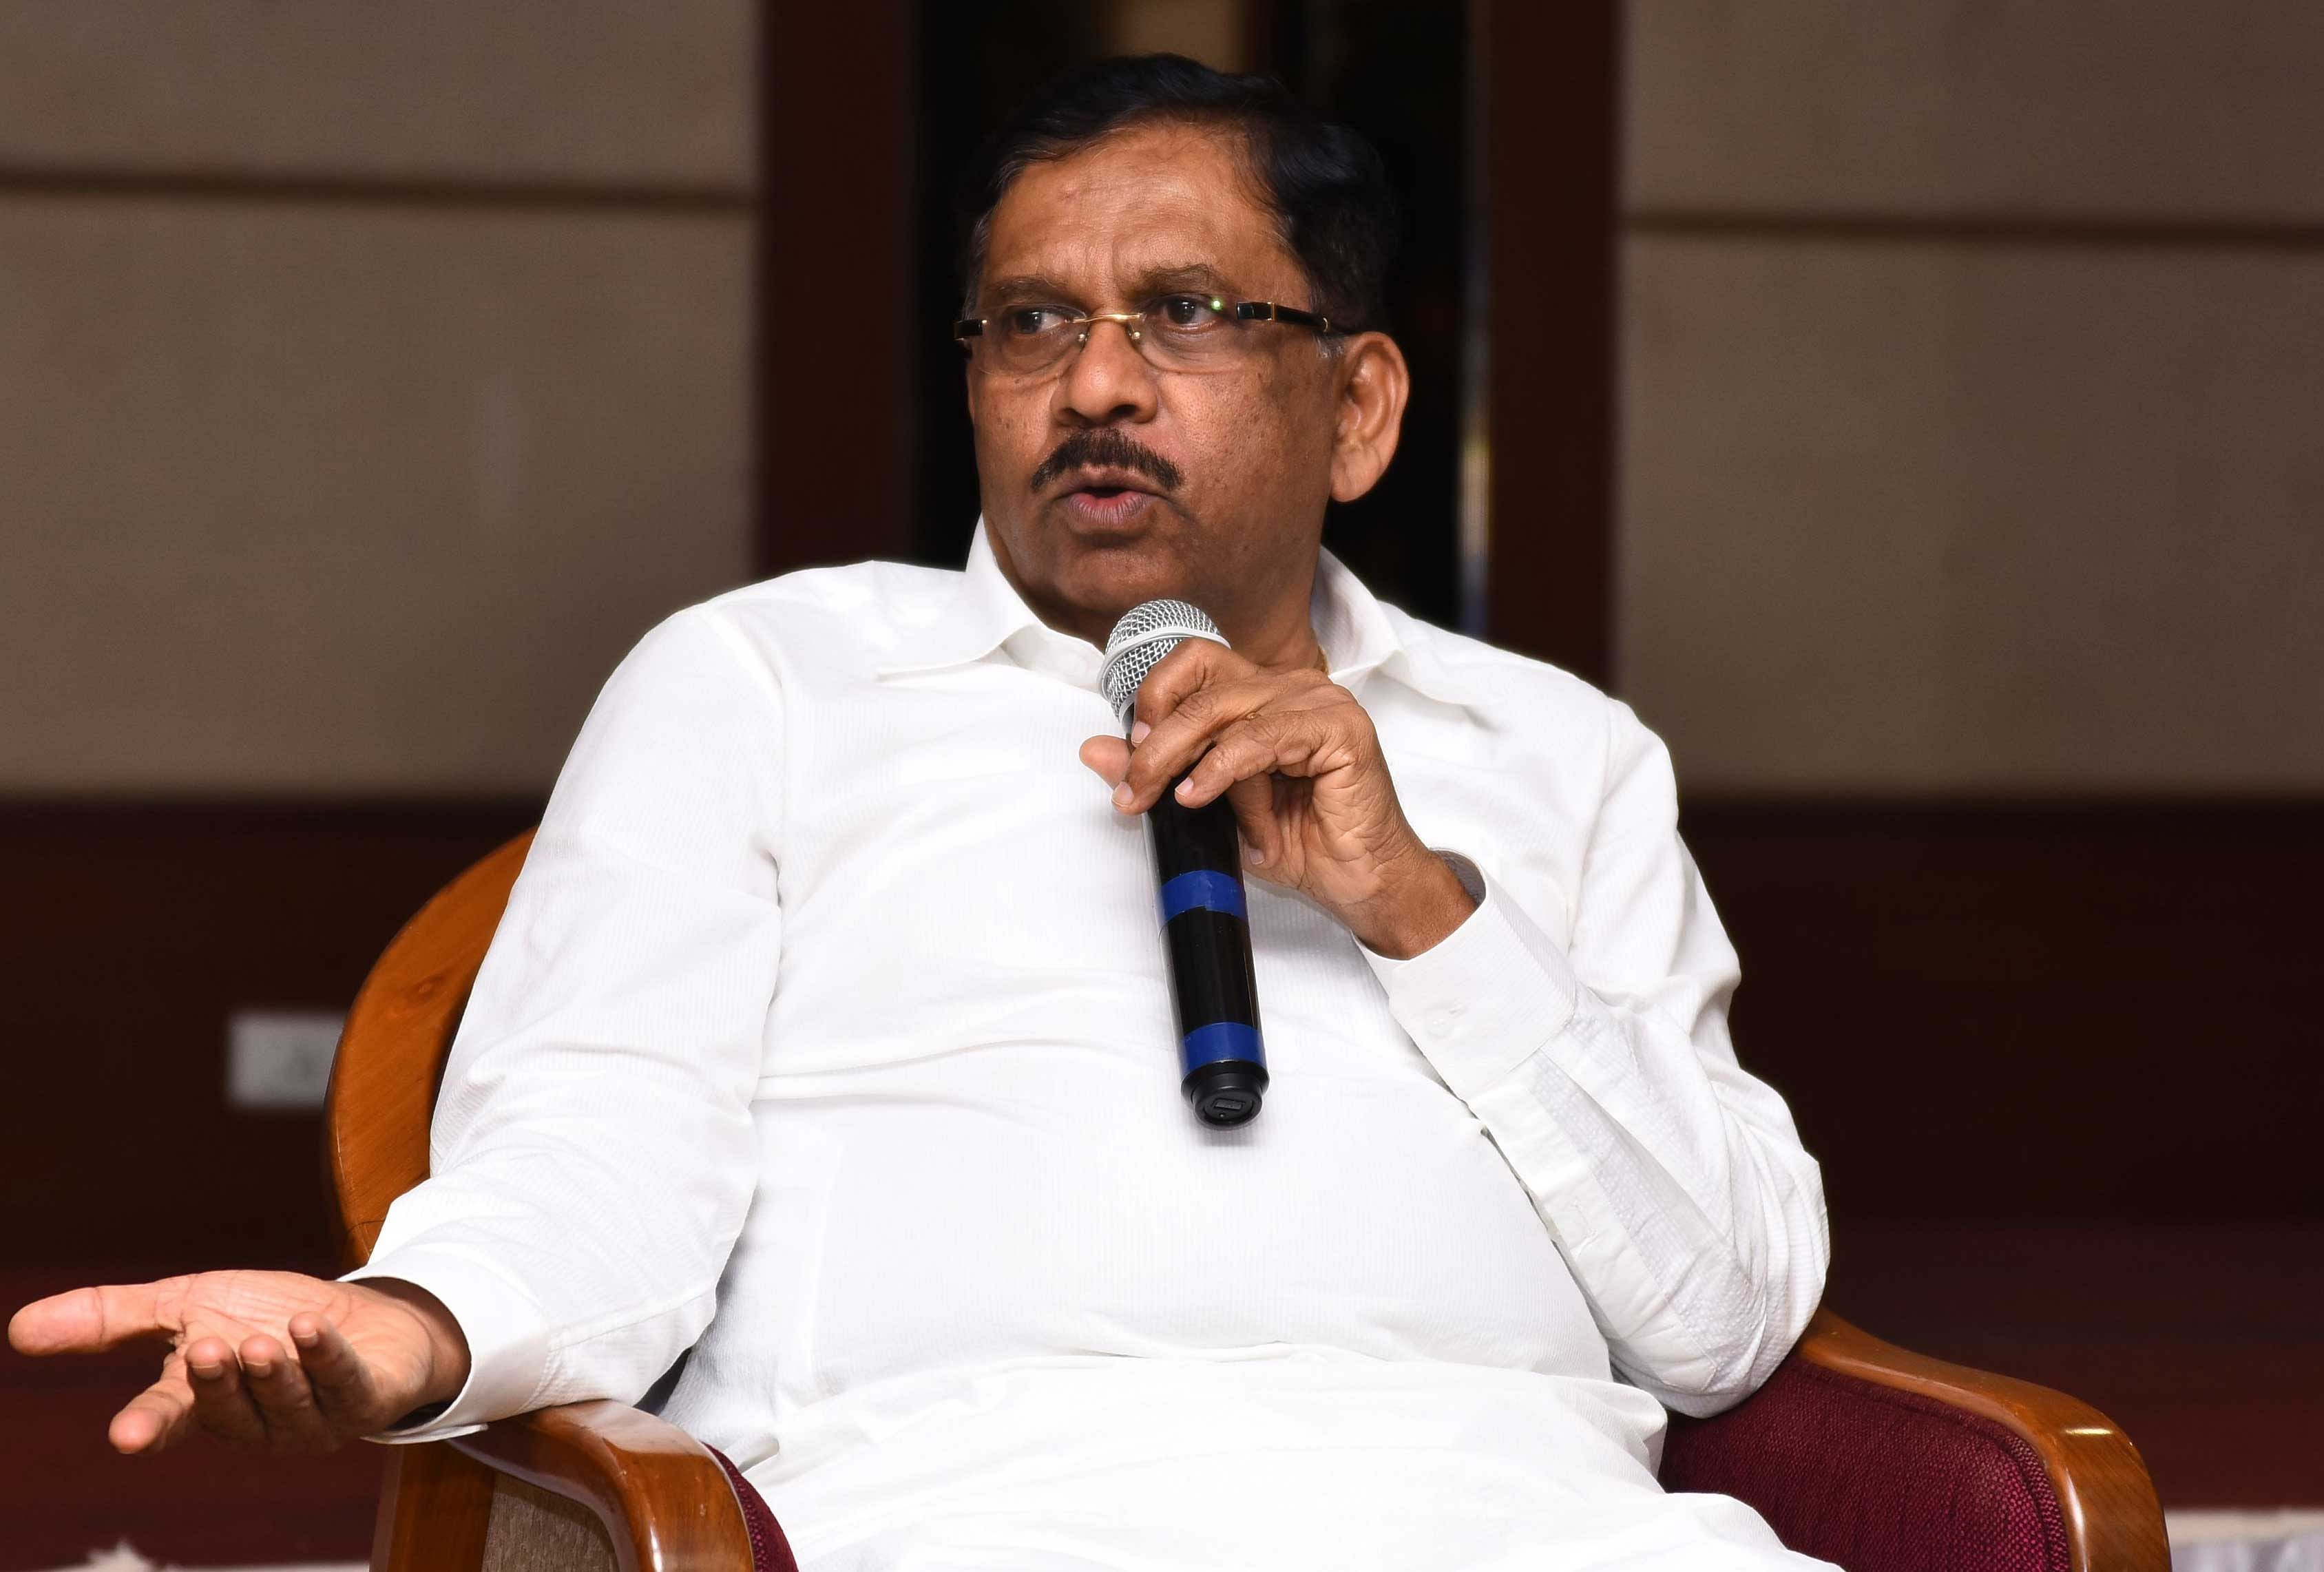 The government will initiate action against those who disrupt Tipu Jayanti celebrations, Deputy Chief Minister and Home Minister G Parameshwara said on Sunday.